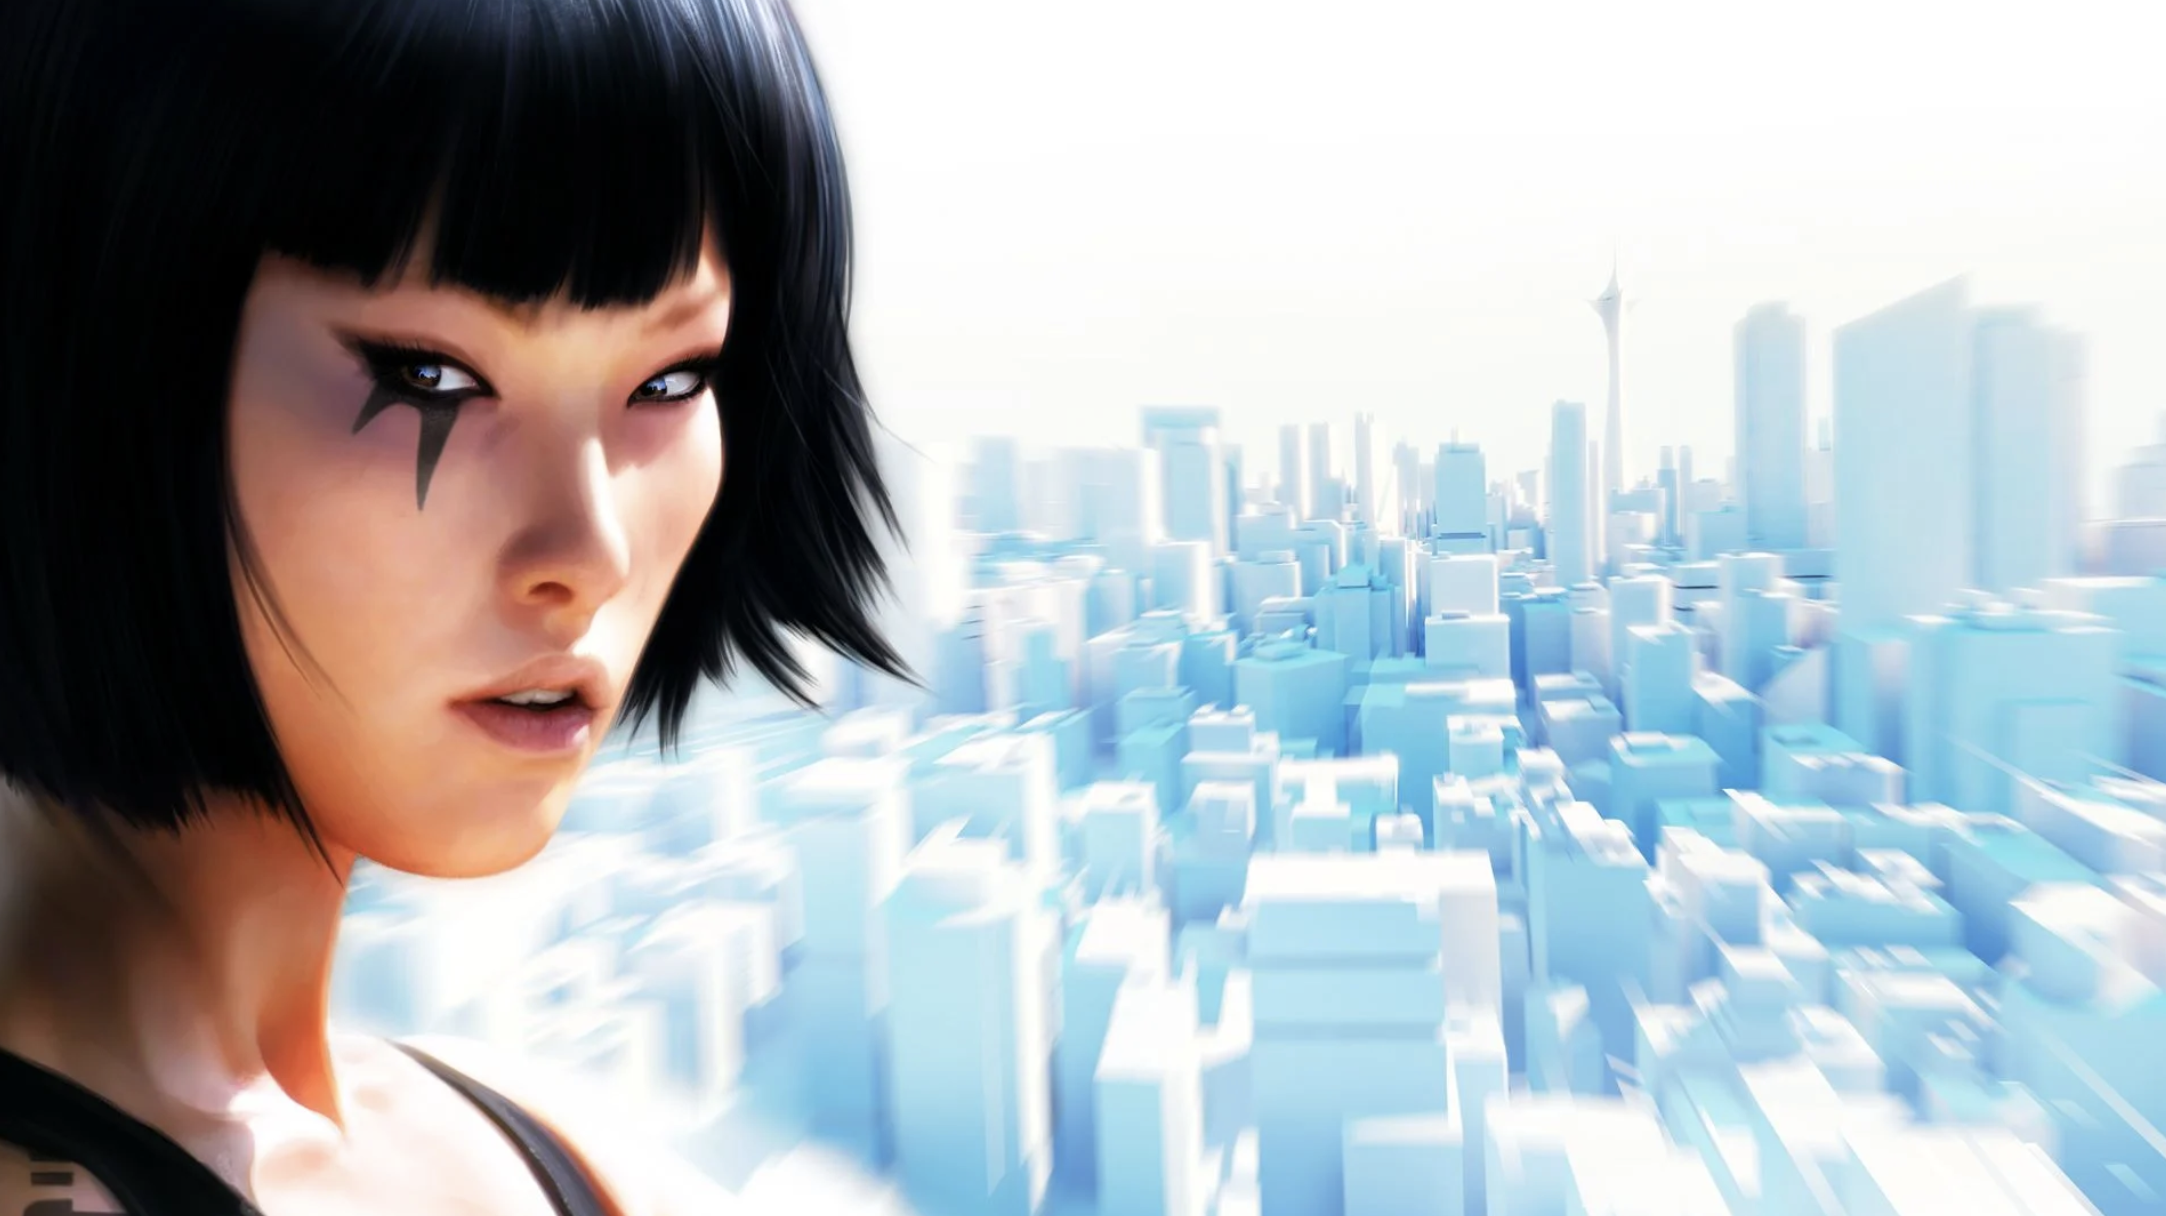 Mirror's Edge and Onrush Among the EA Games Shuttering Their Servers Soon